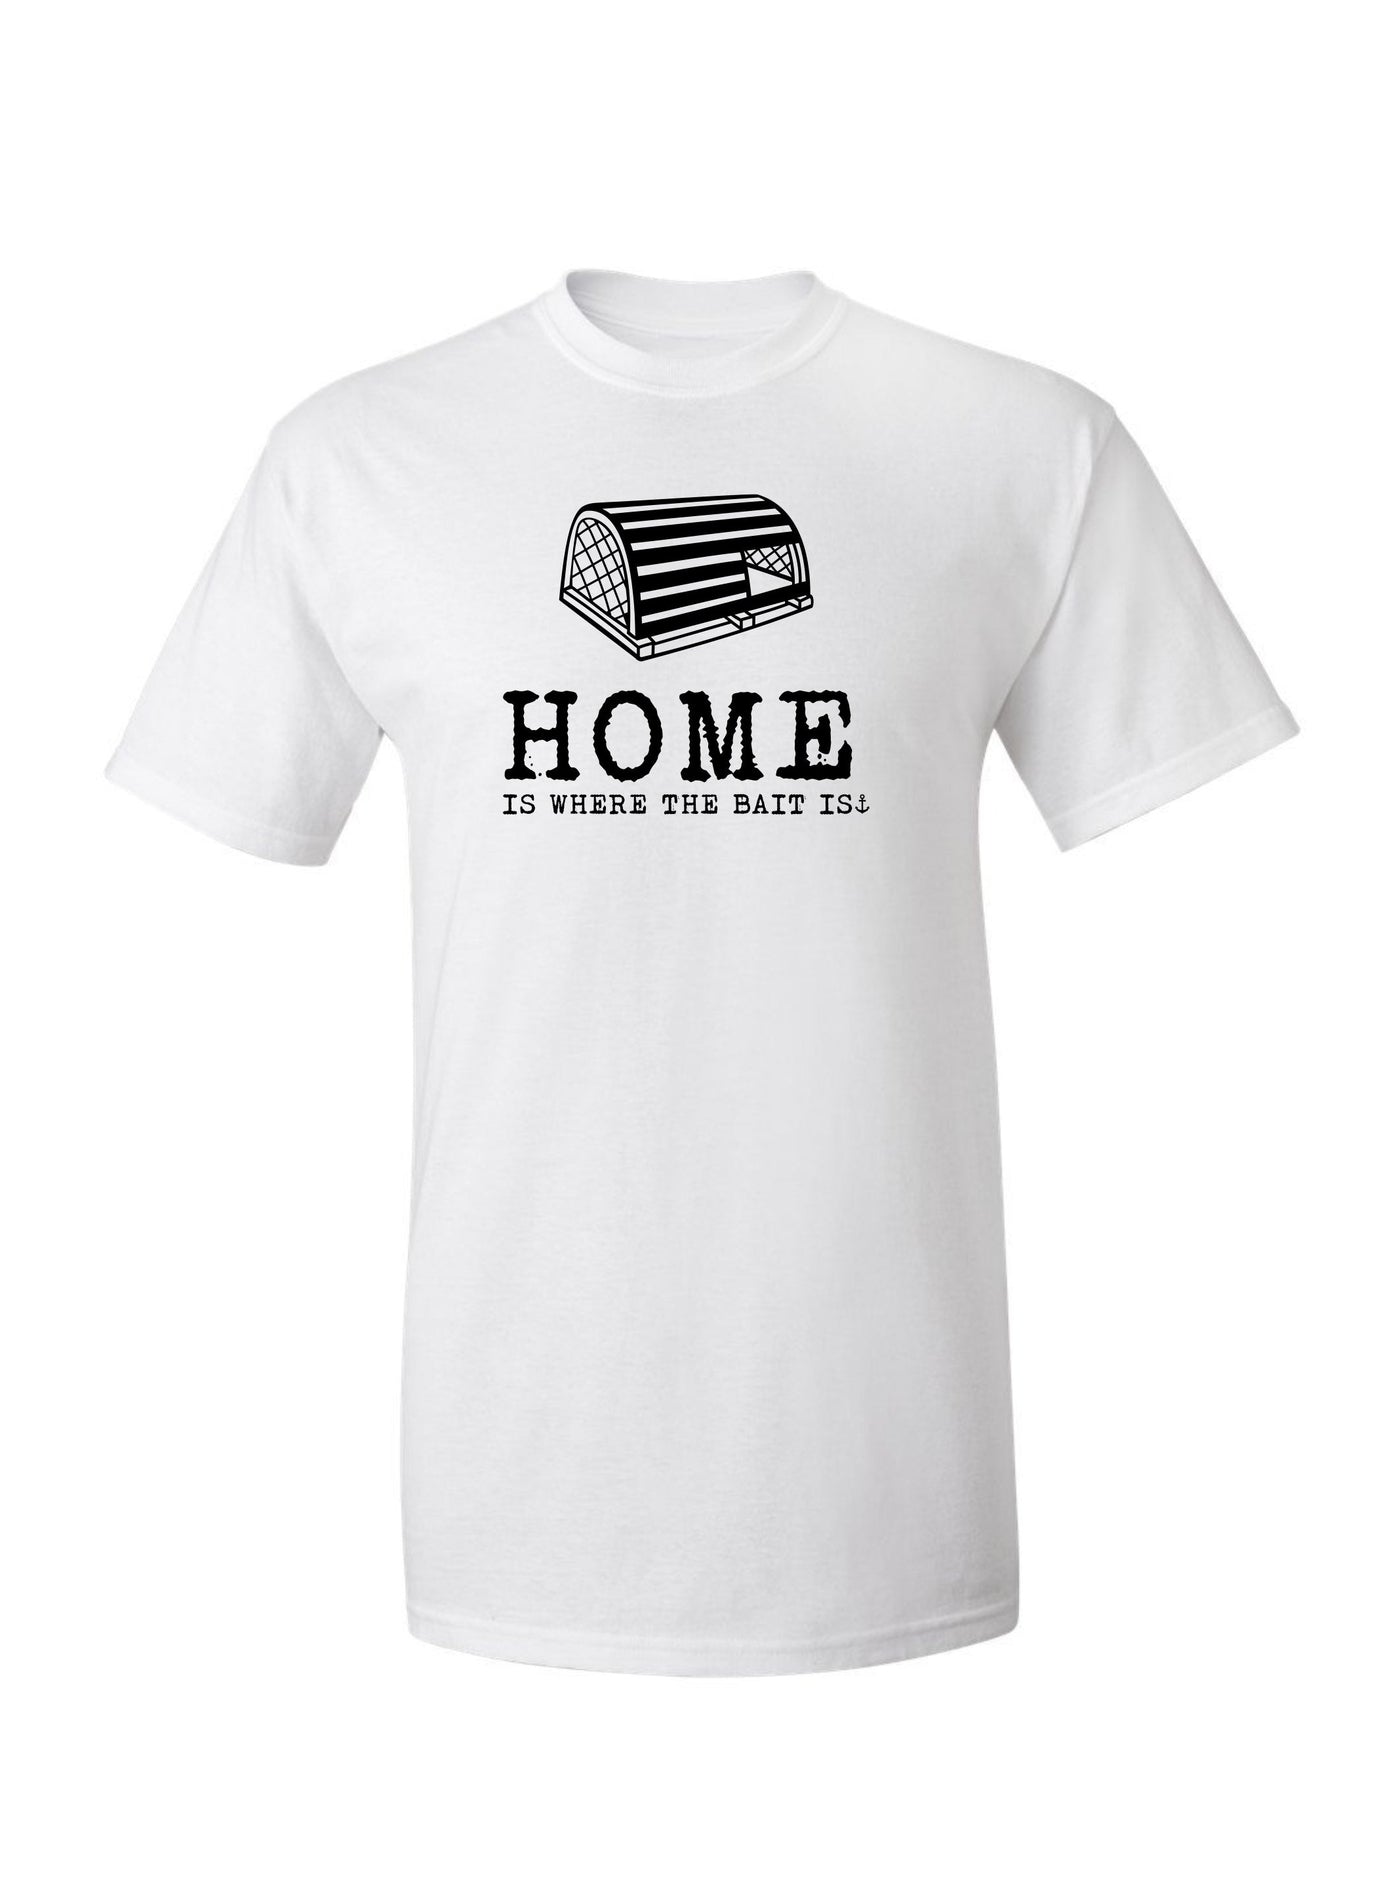 "Home Is Where The Bait Is" T-Shirt